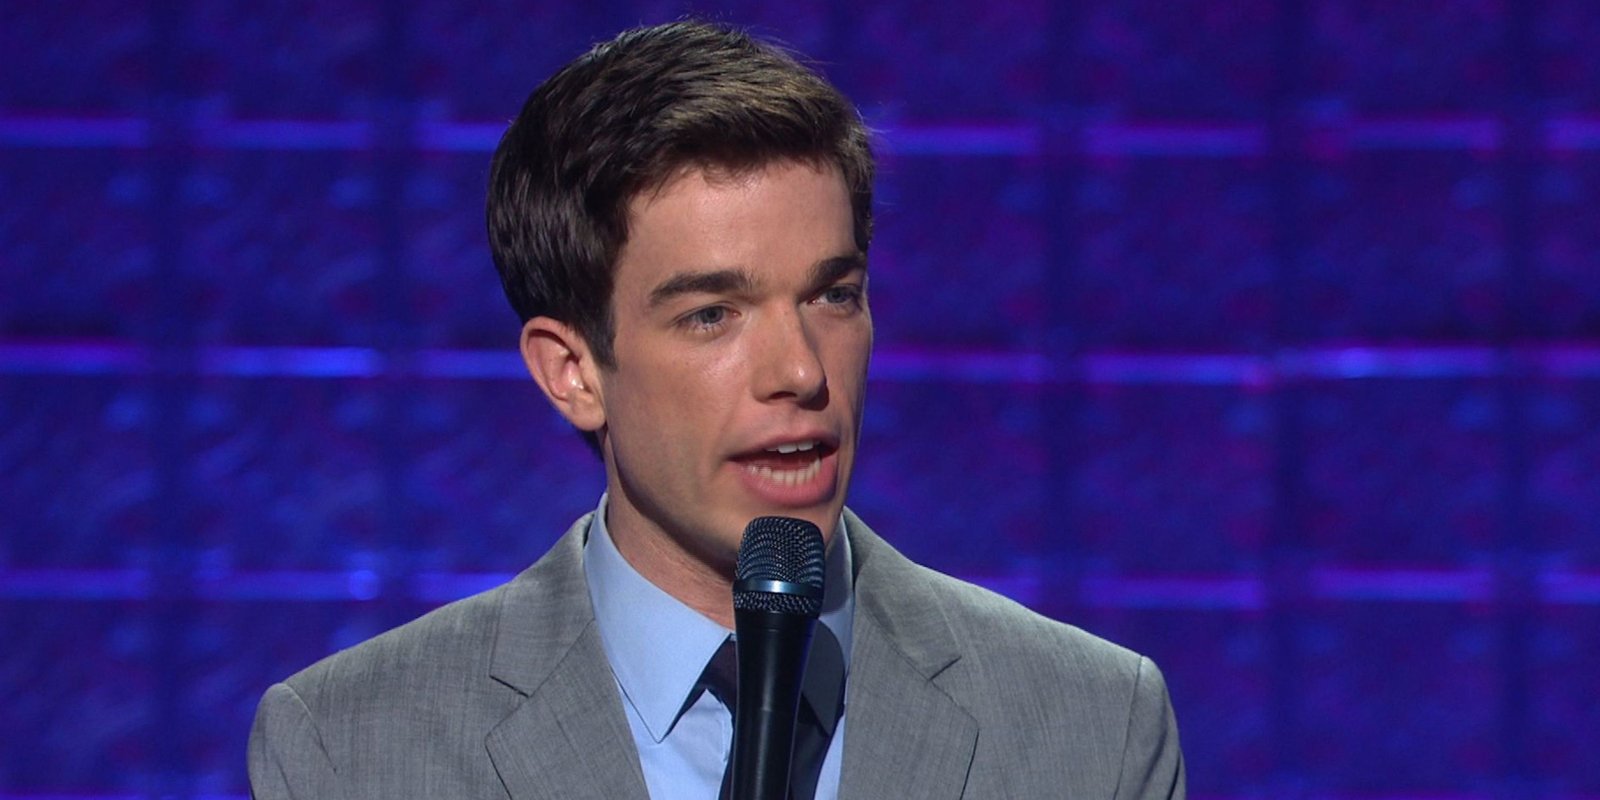 John Mulaney on stage in New in Town